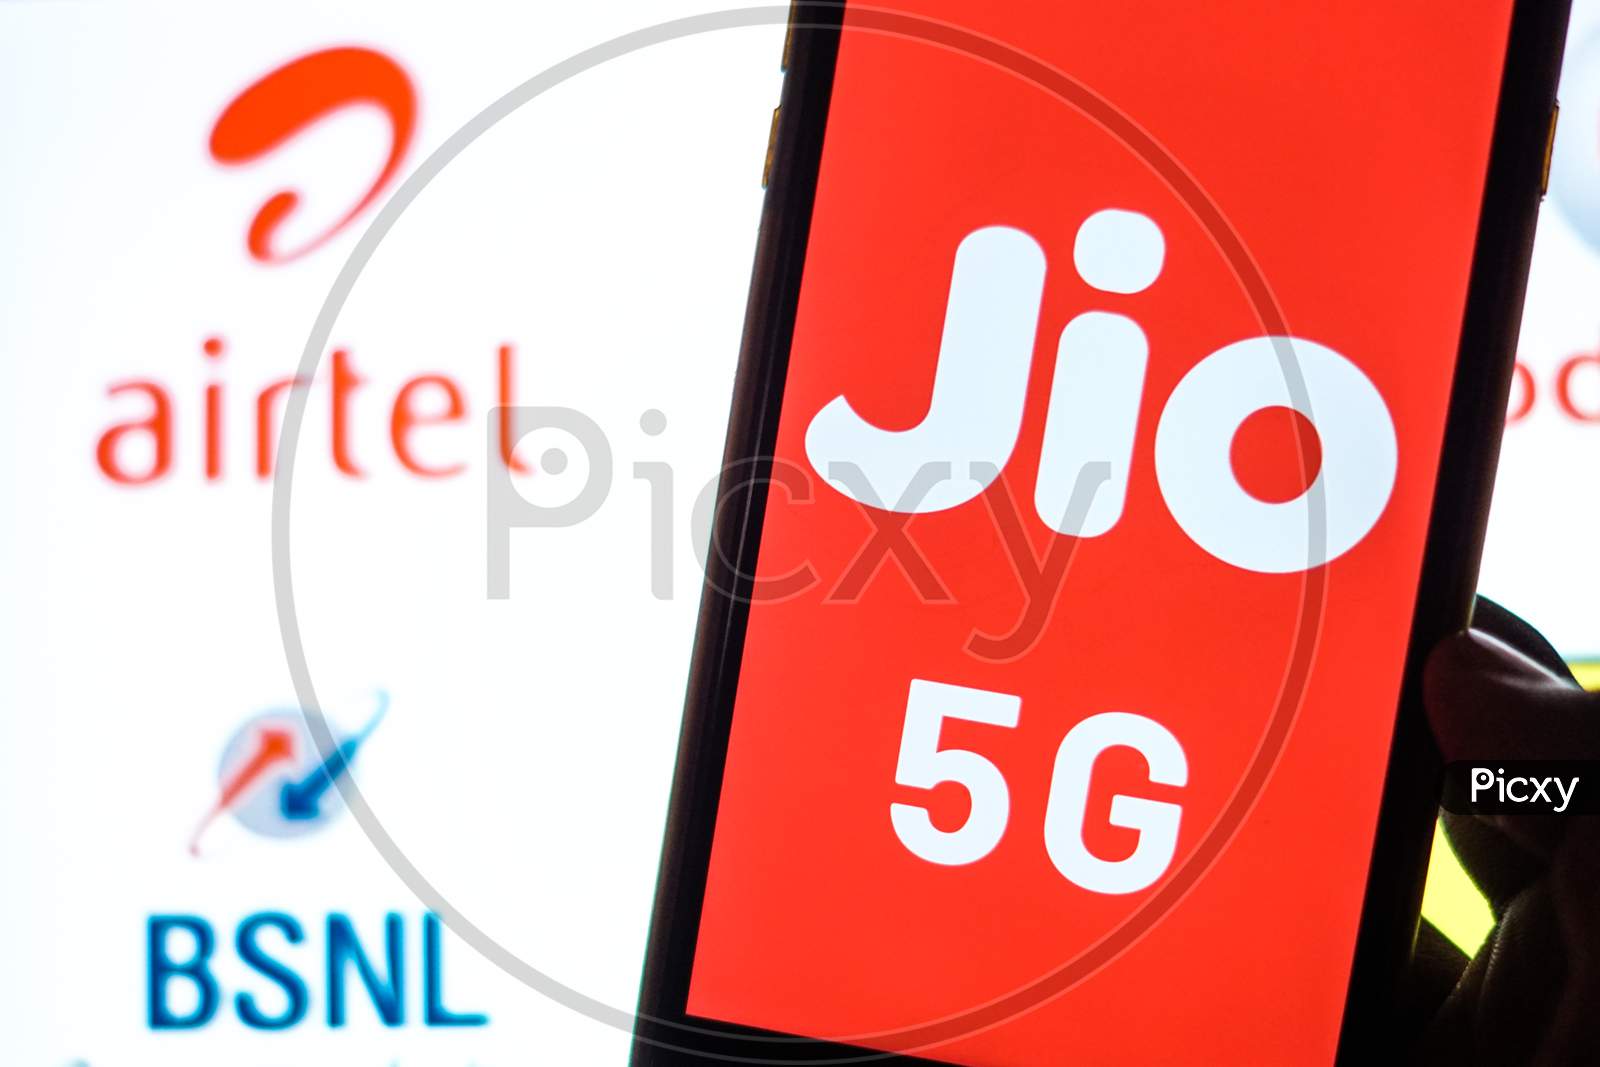 Close Up shot of a Mobilephone or Smartphone with Jio 5G on Screen and BSNL and Airtel Logo in the Background - A Concept of Jio 5G vs BSNL and Airtel 4G